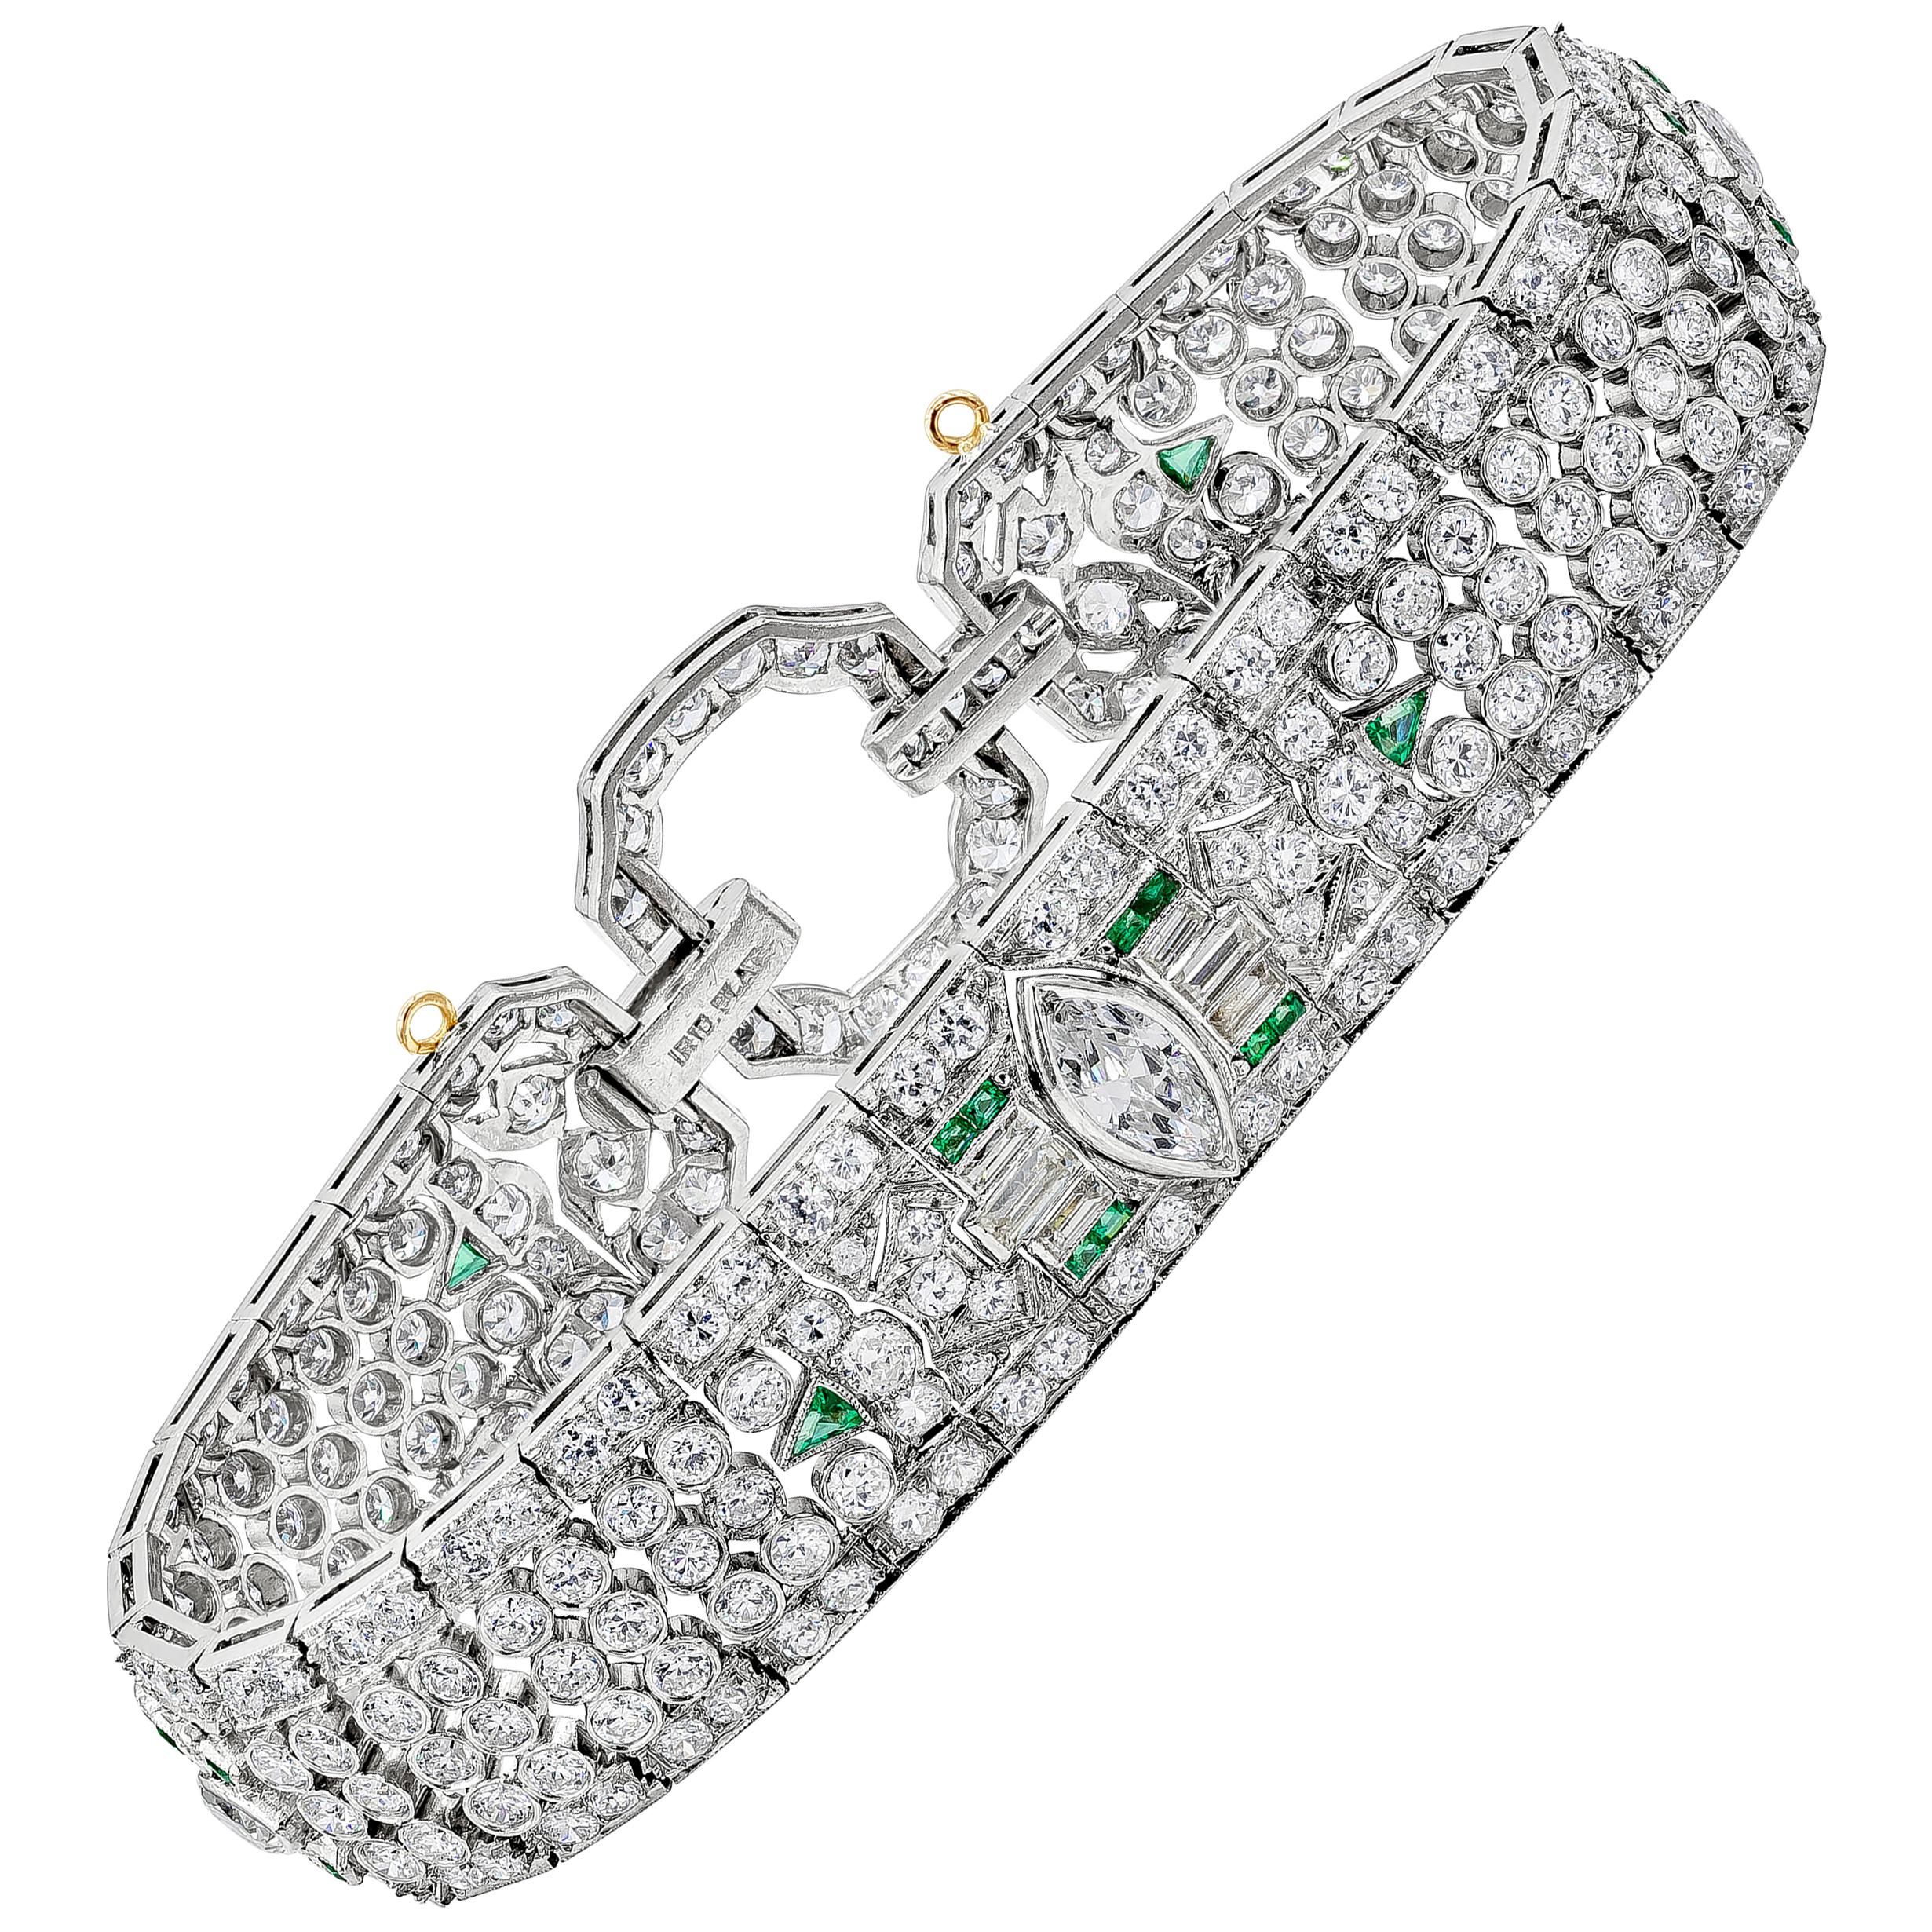 15.50 Carats Total Mixed-Cut Diamond and Emerald Antique Fashion Bracelet For Sale